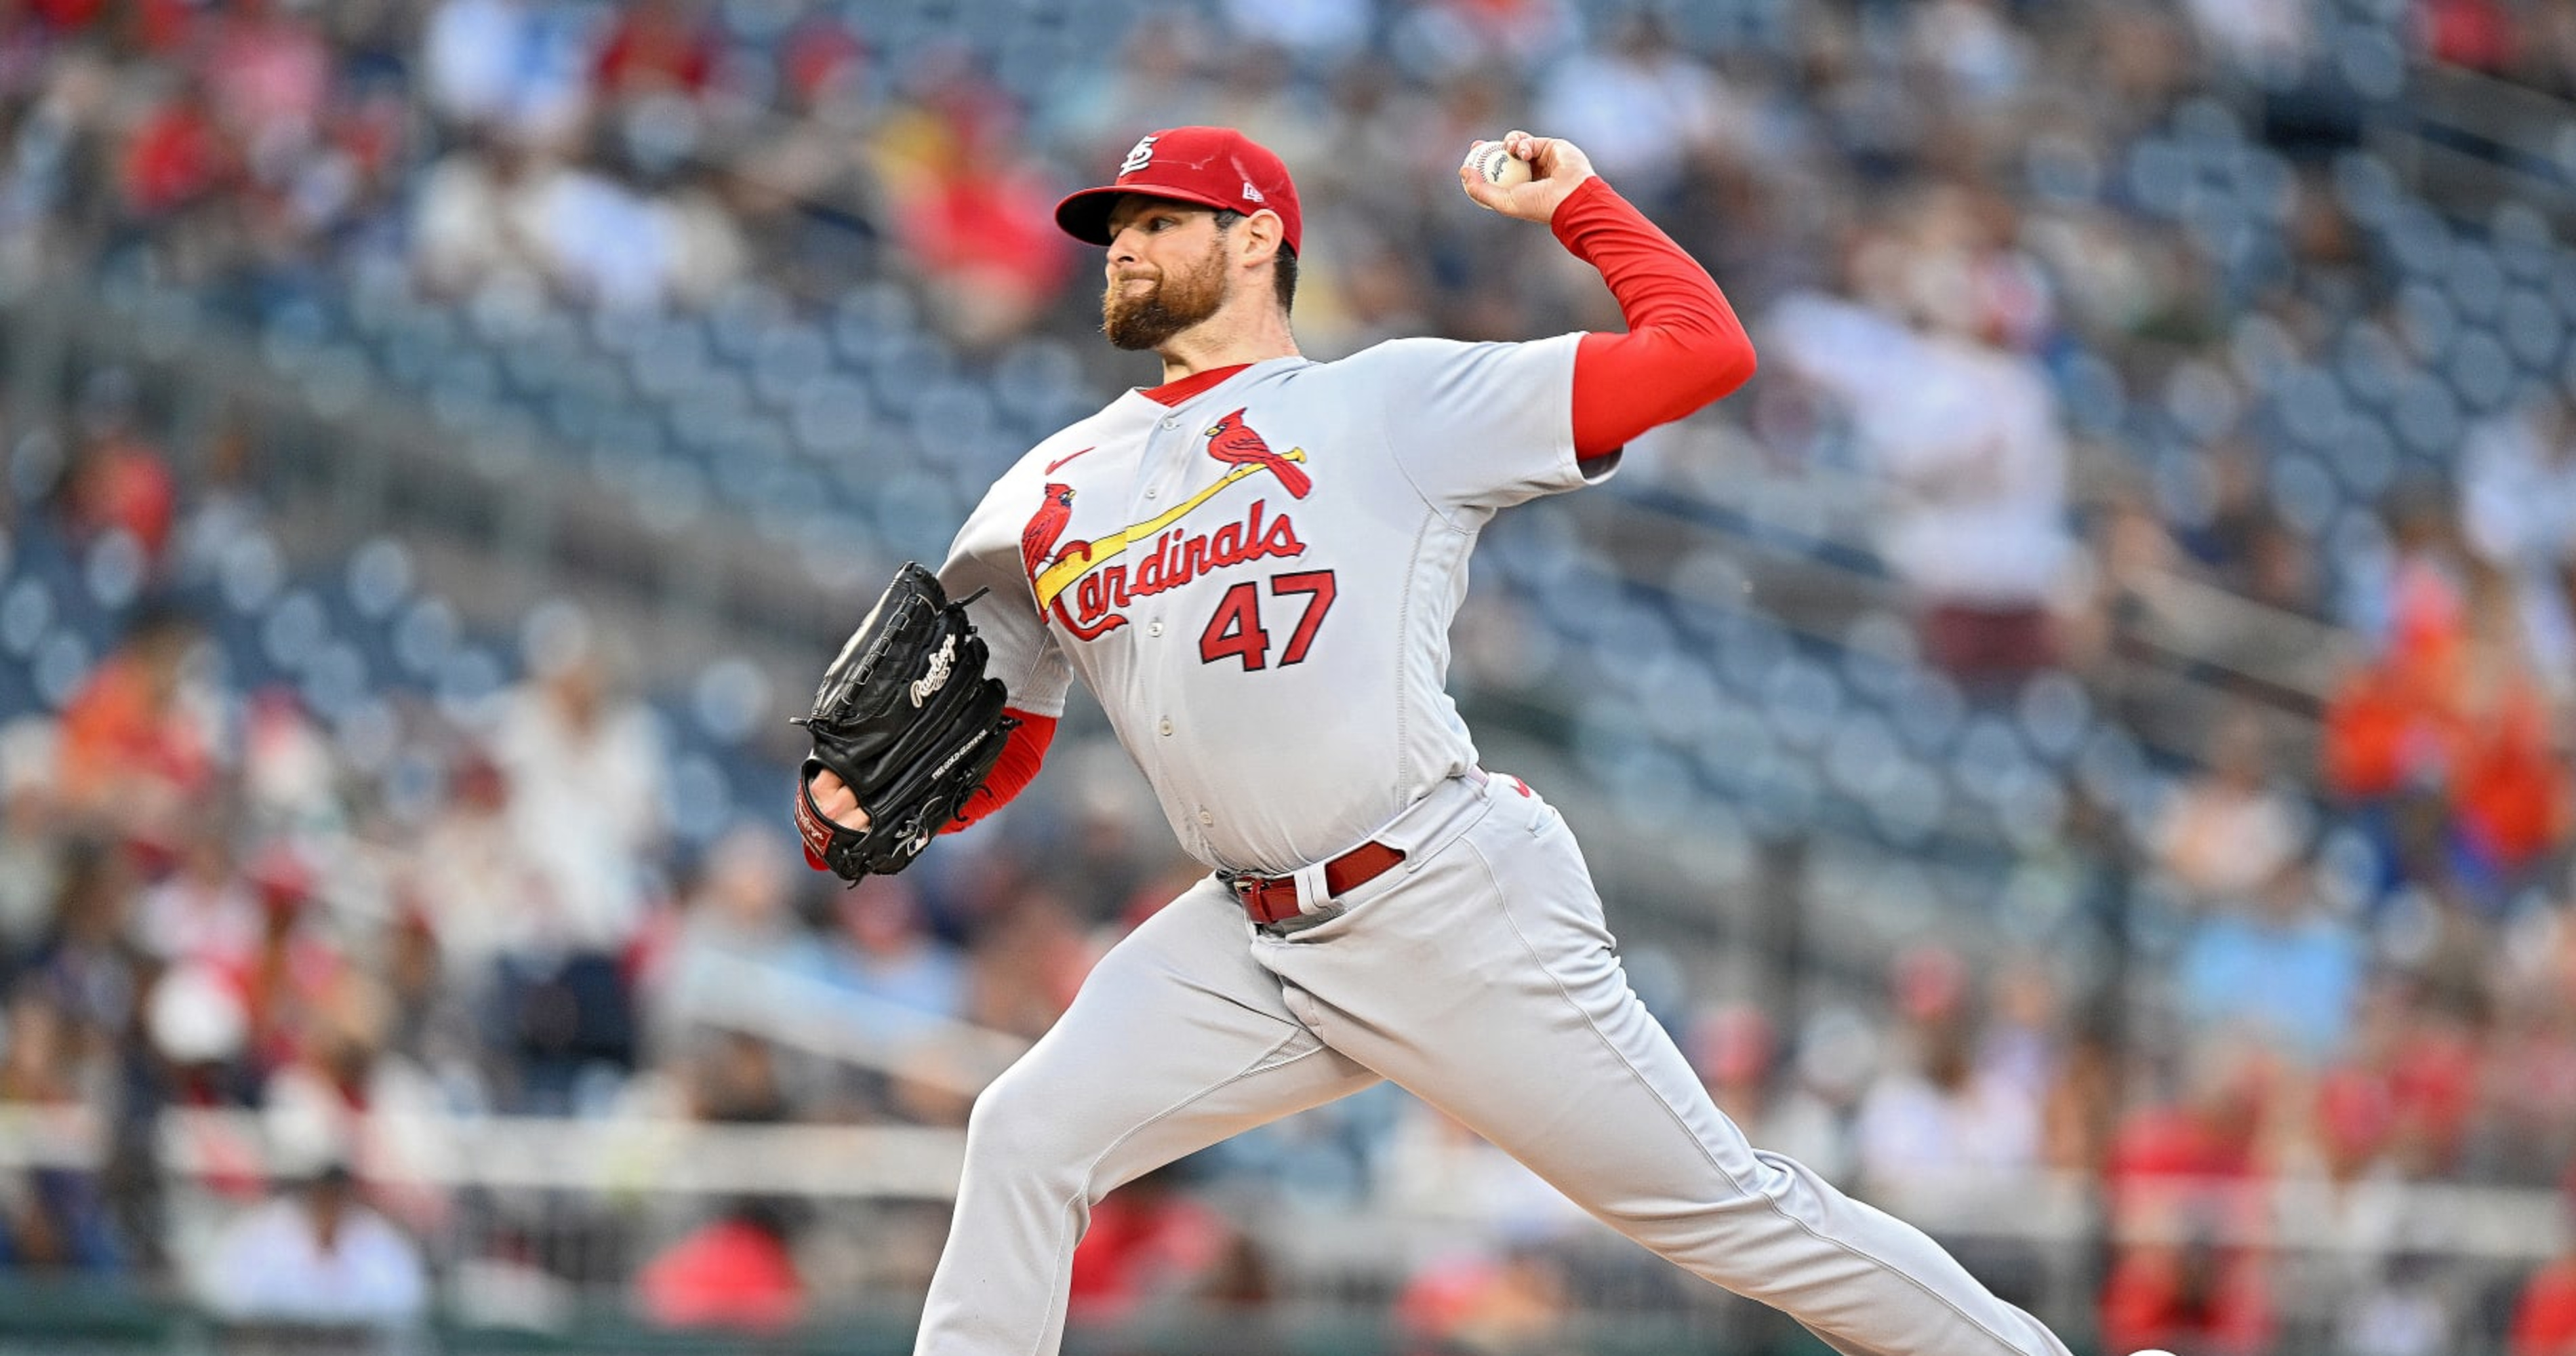 Expiring Pitcher Contracts Challenge St. Louis Cardinals' Future Payroll